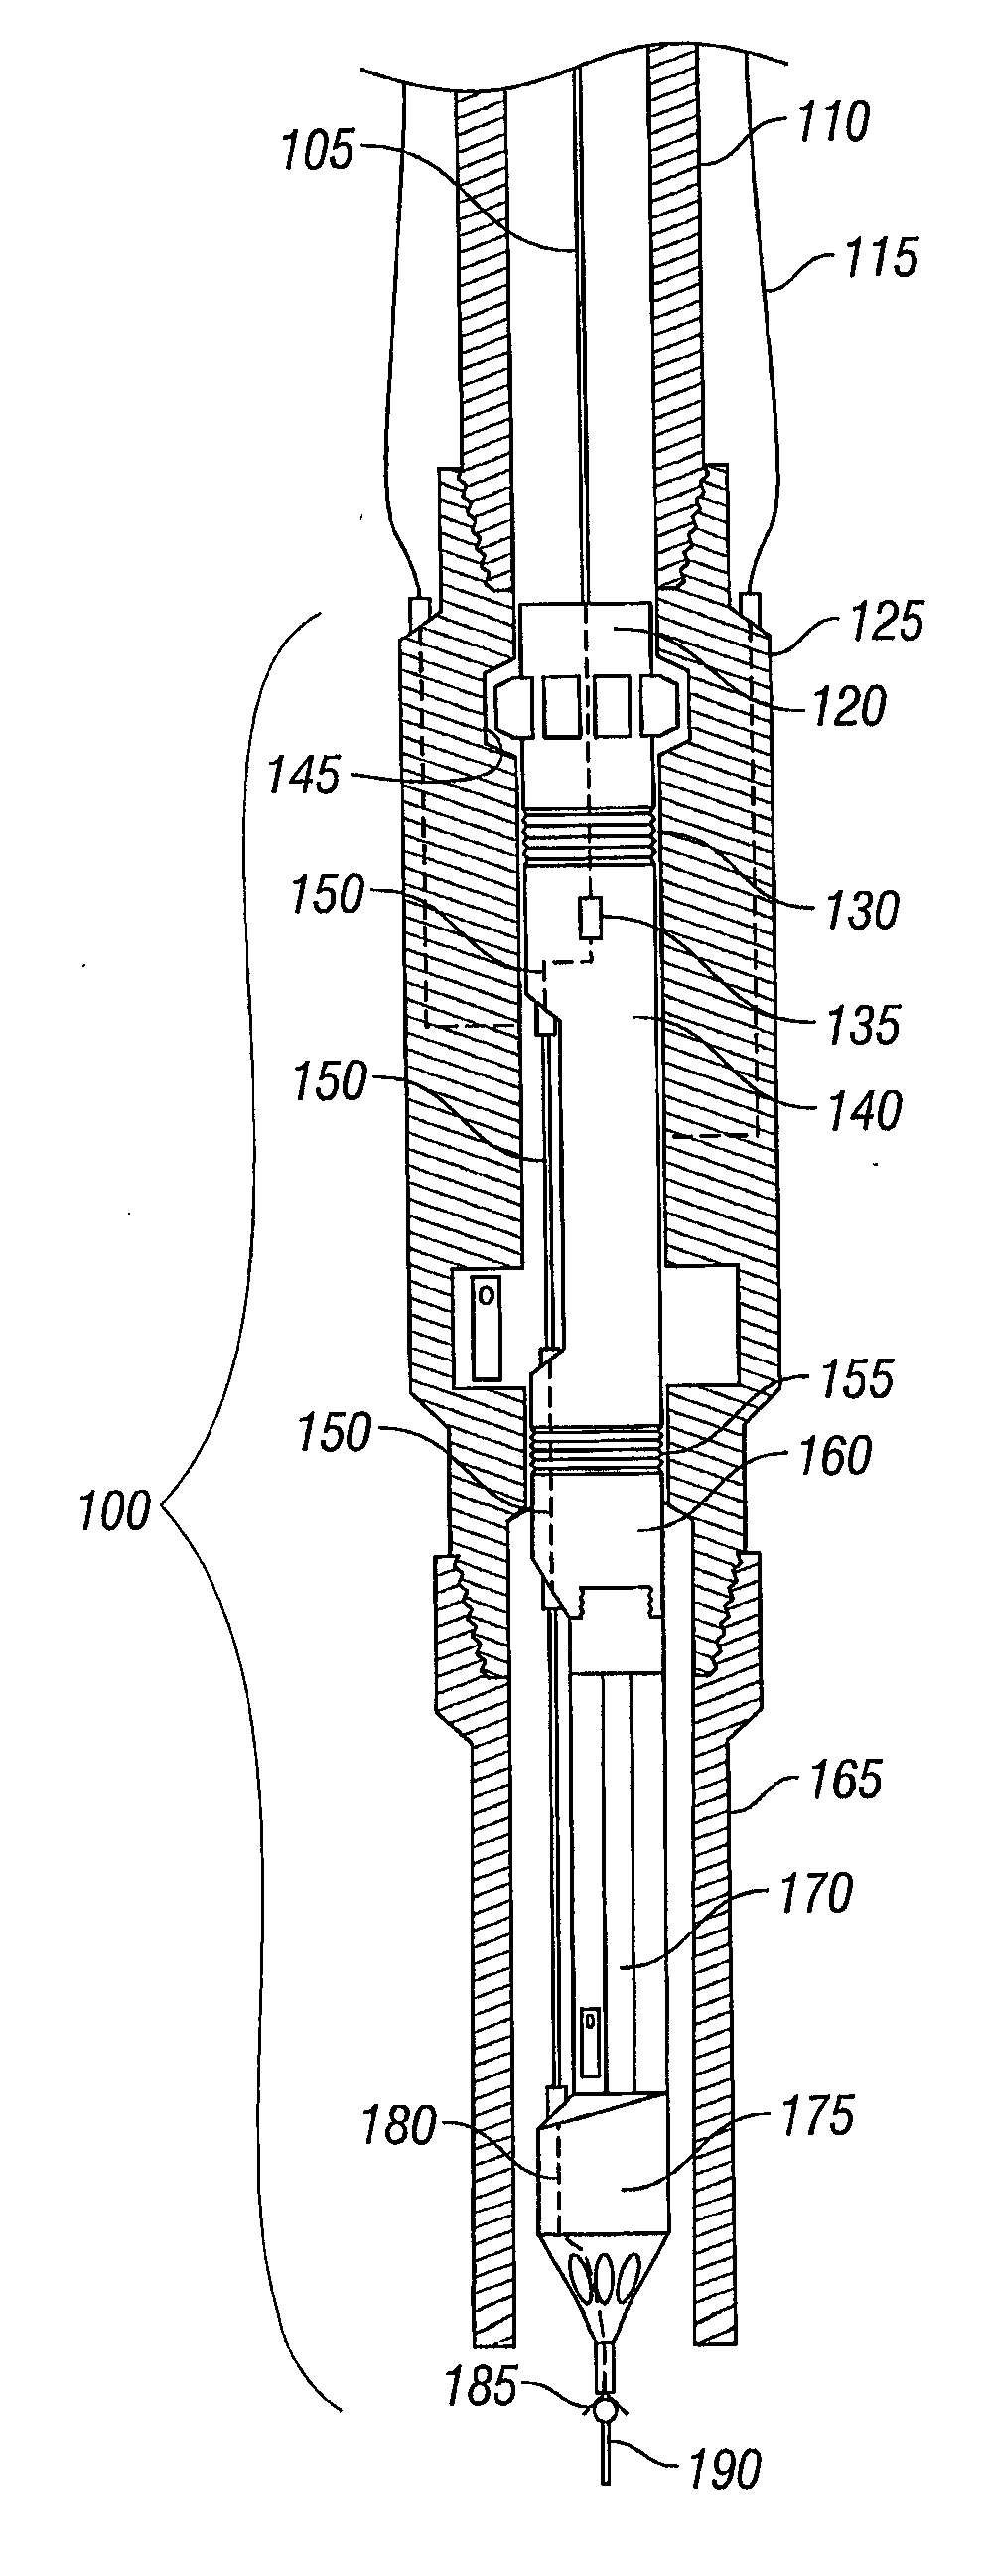 Method and Apparatus for Continuously Injecting Fluid in a Wellbore While Maintaining Safety Valve Operation